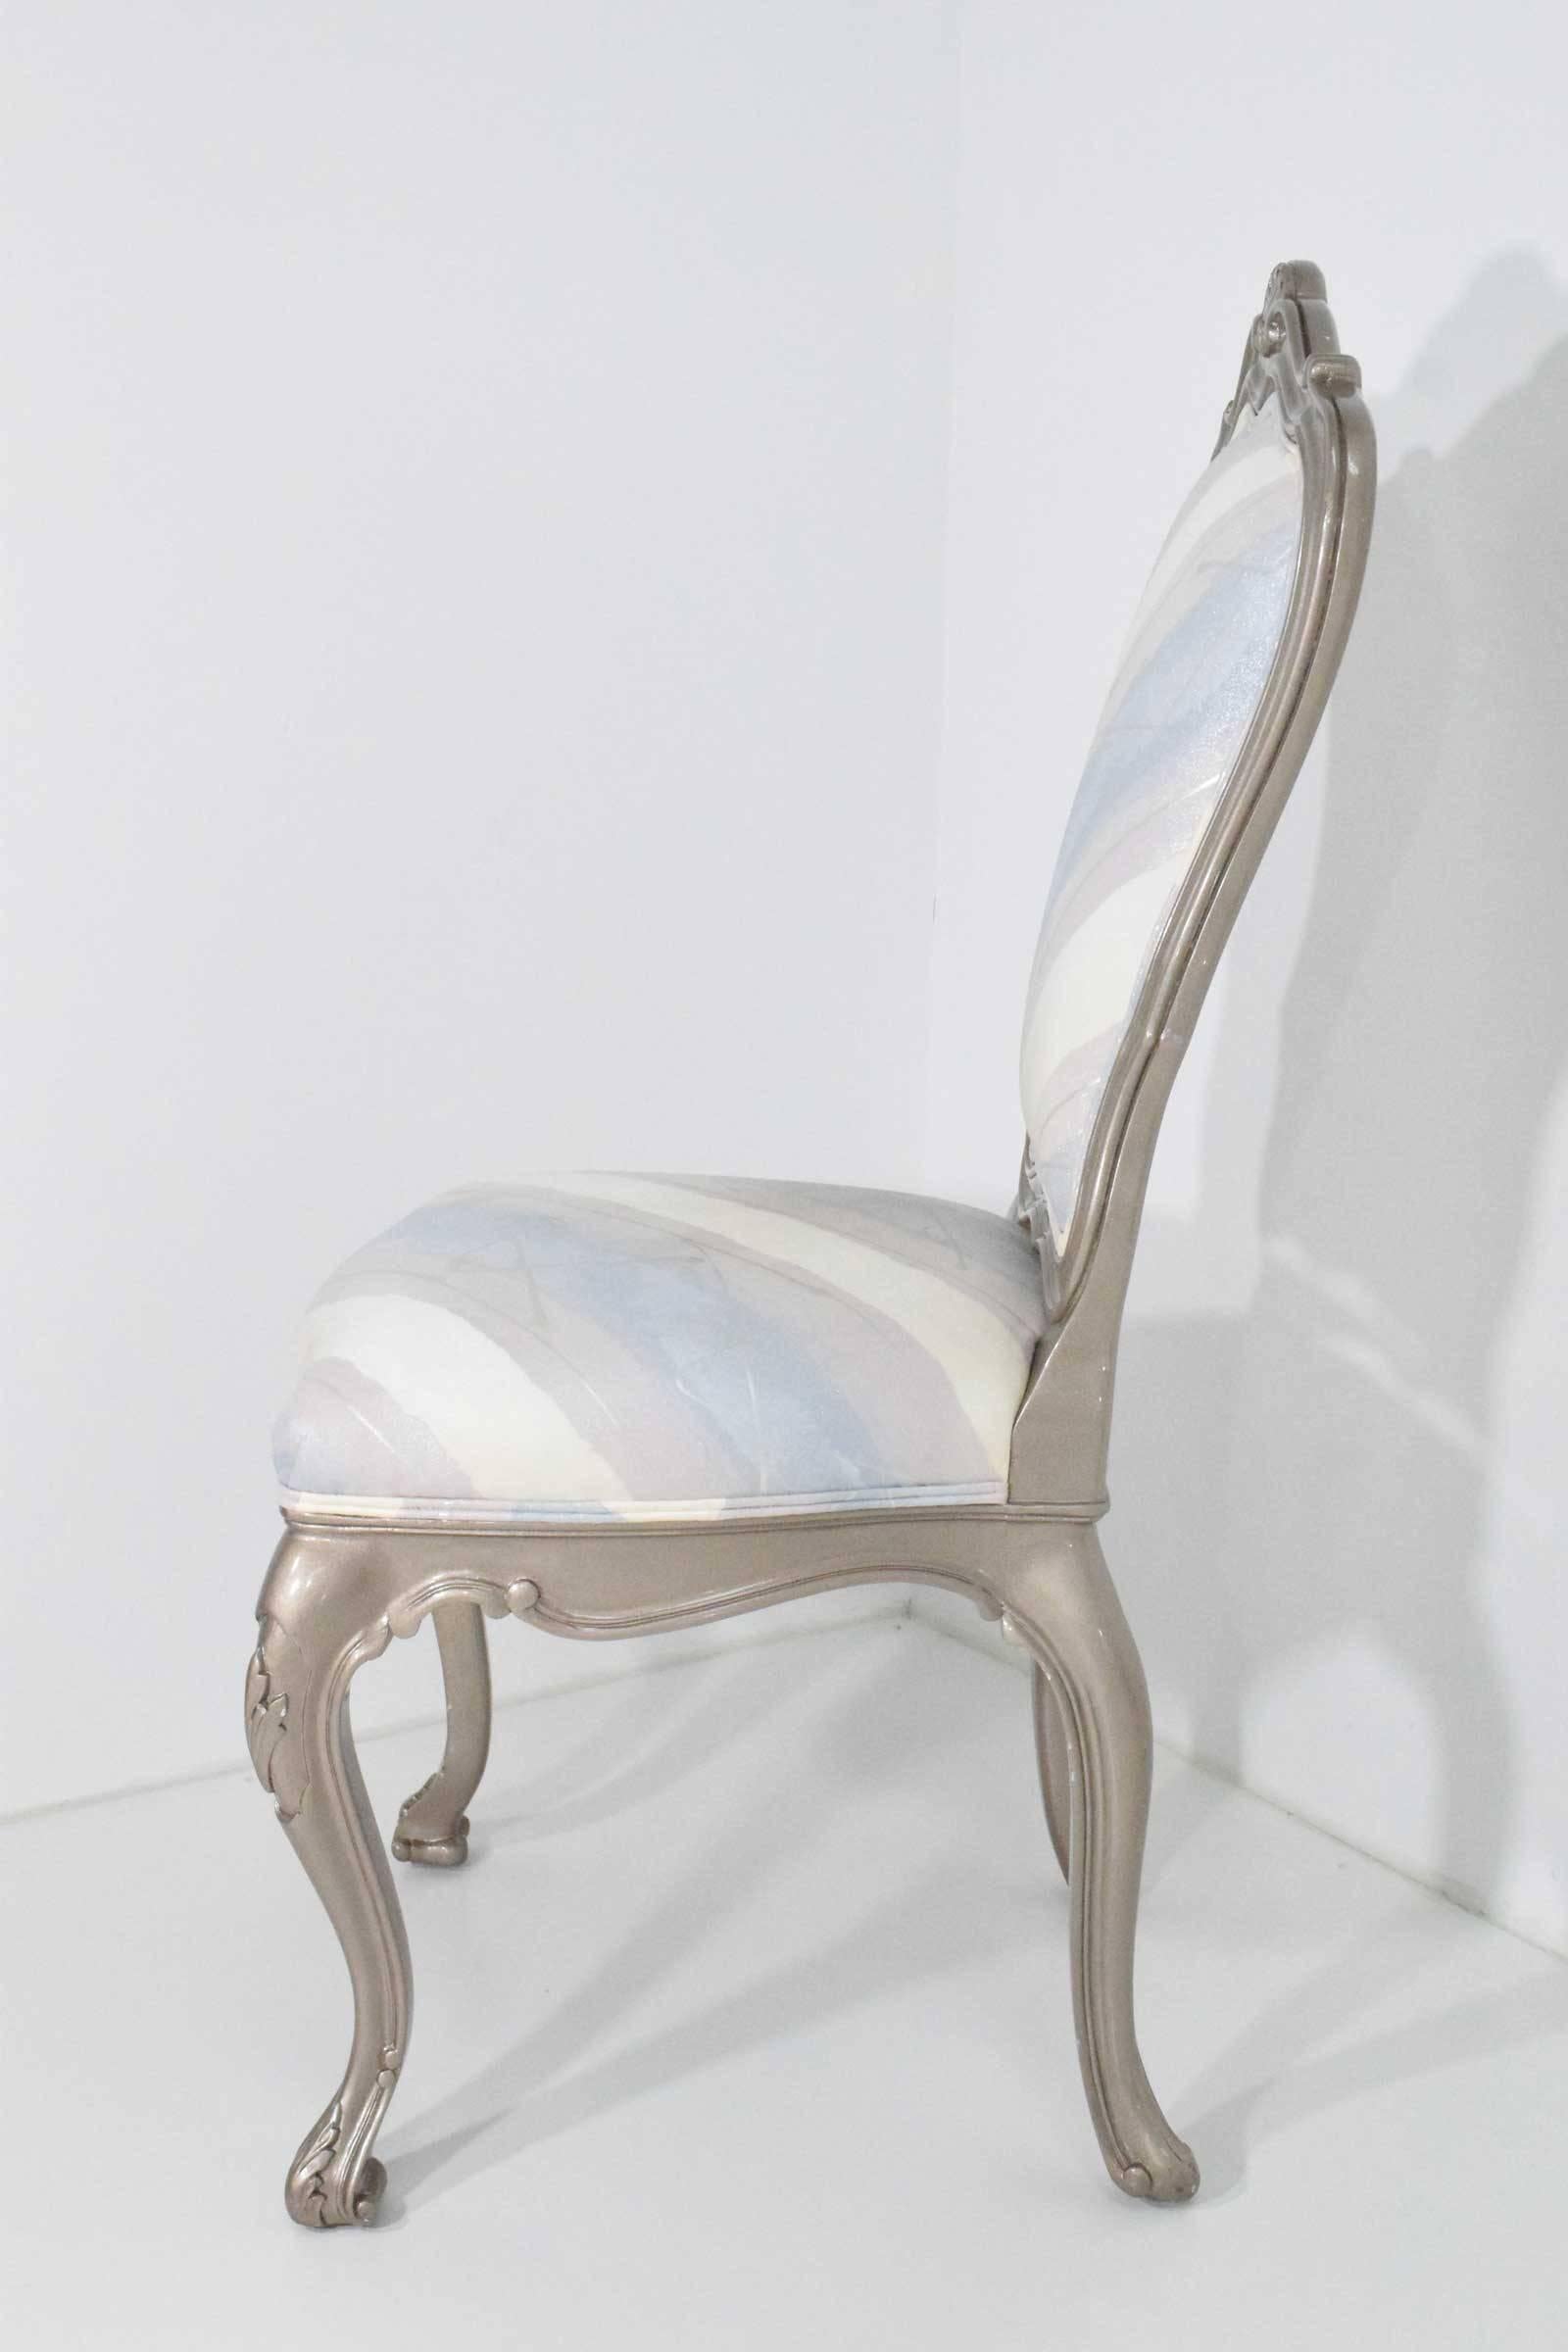 Louis XVI style dining chairs done in a high-gloss platinum lacquer. We have six chairs and can expand to eight by repairing legs on two of the chairs. These are super glossy!!